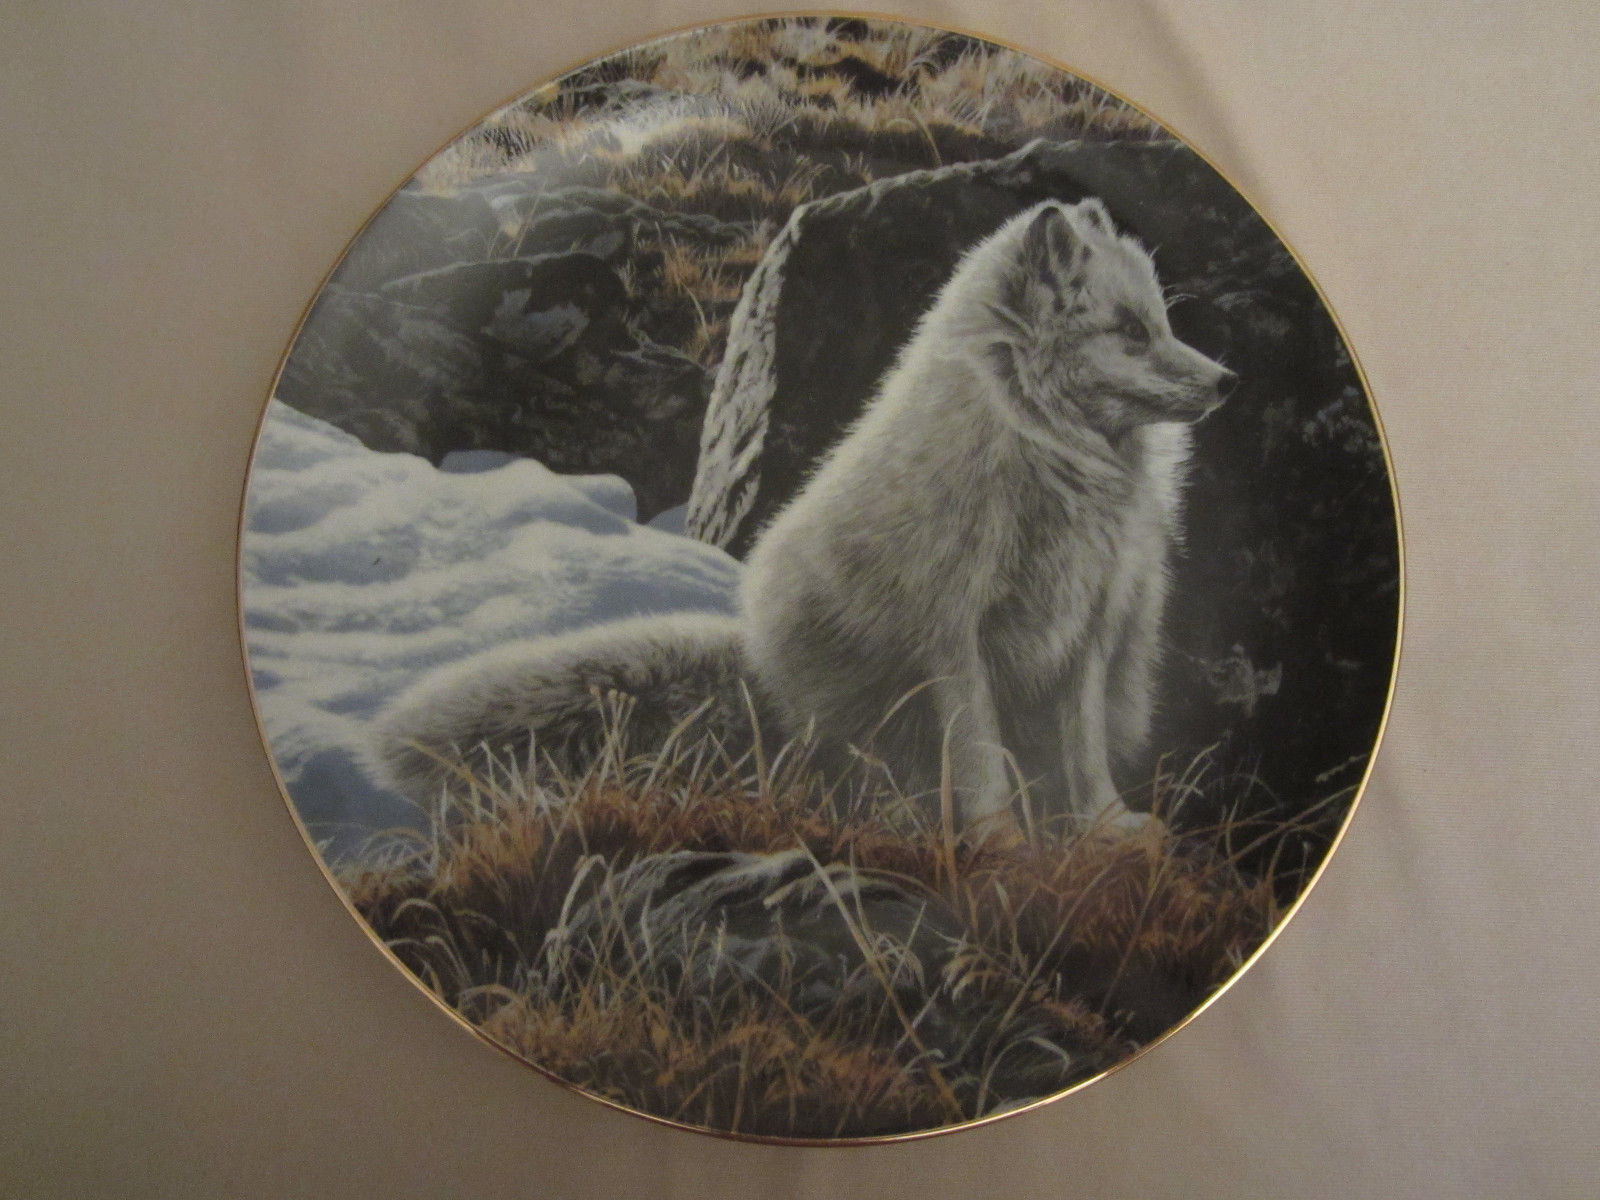 ARCTIC FOX Collector Plate NORTHERN MORNING Ron Parker NATURE'S QUIET MOMENTS - $39.20